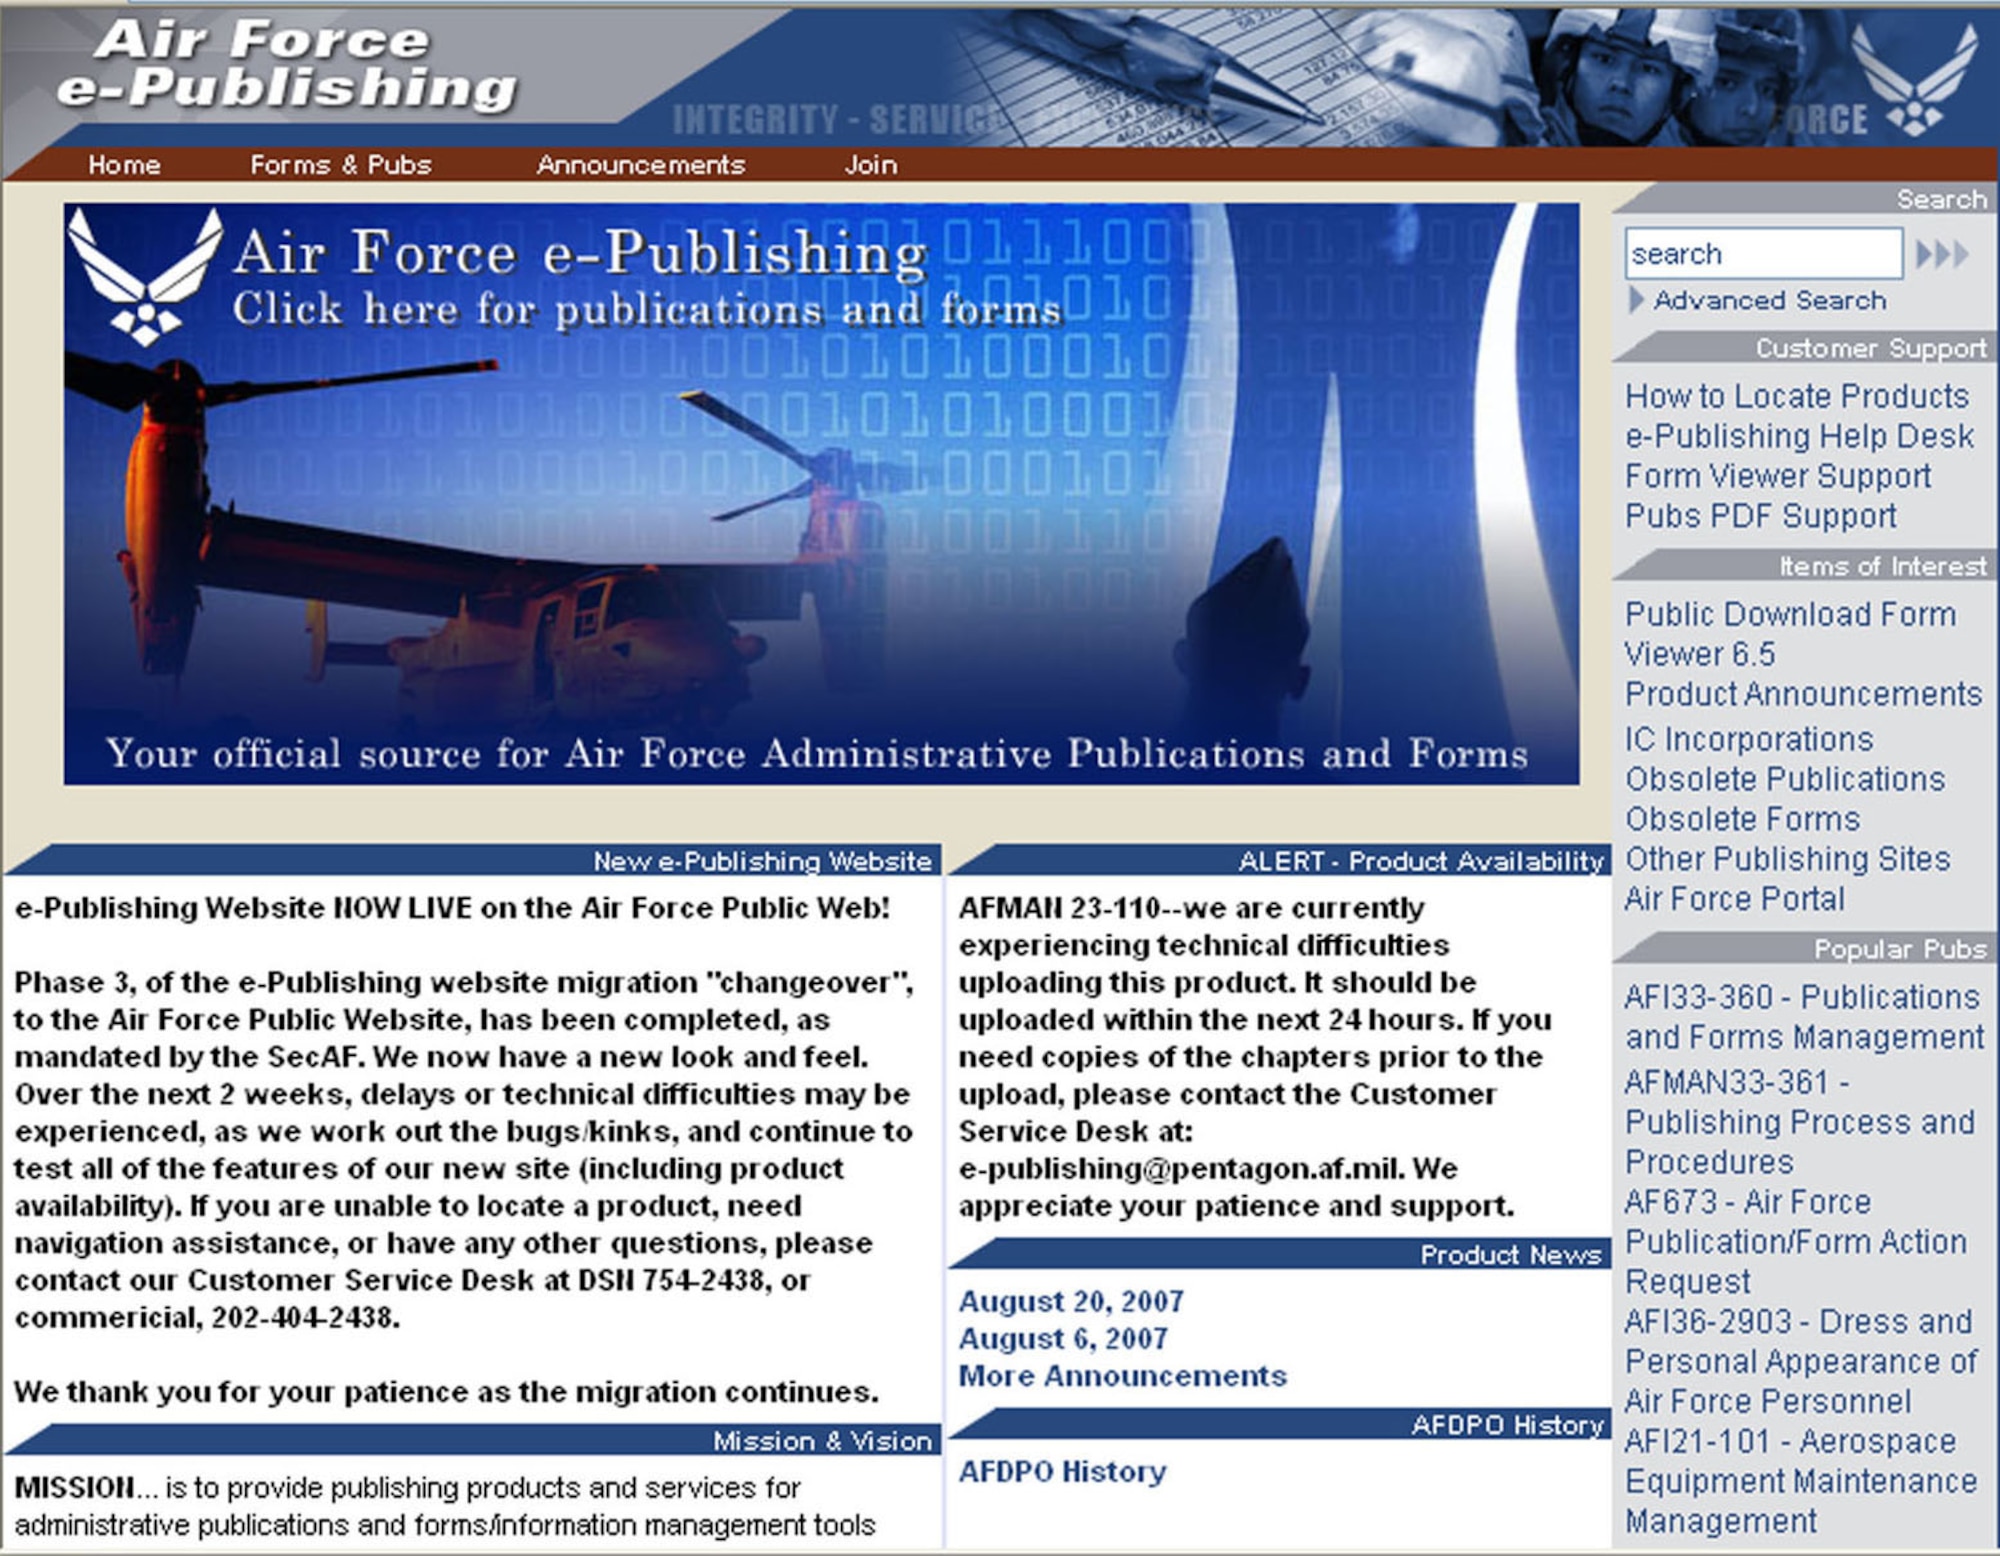 The Air Force Departmental Publishing Office, or e-Pubs, migrated under the Air Force Public Web program and is now accessible at http://www.e-publishing.af.mil. (U.S. Air Force graphic).